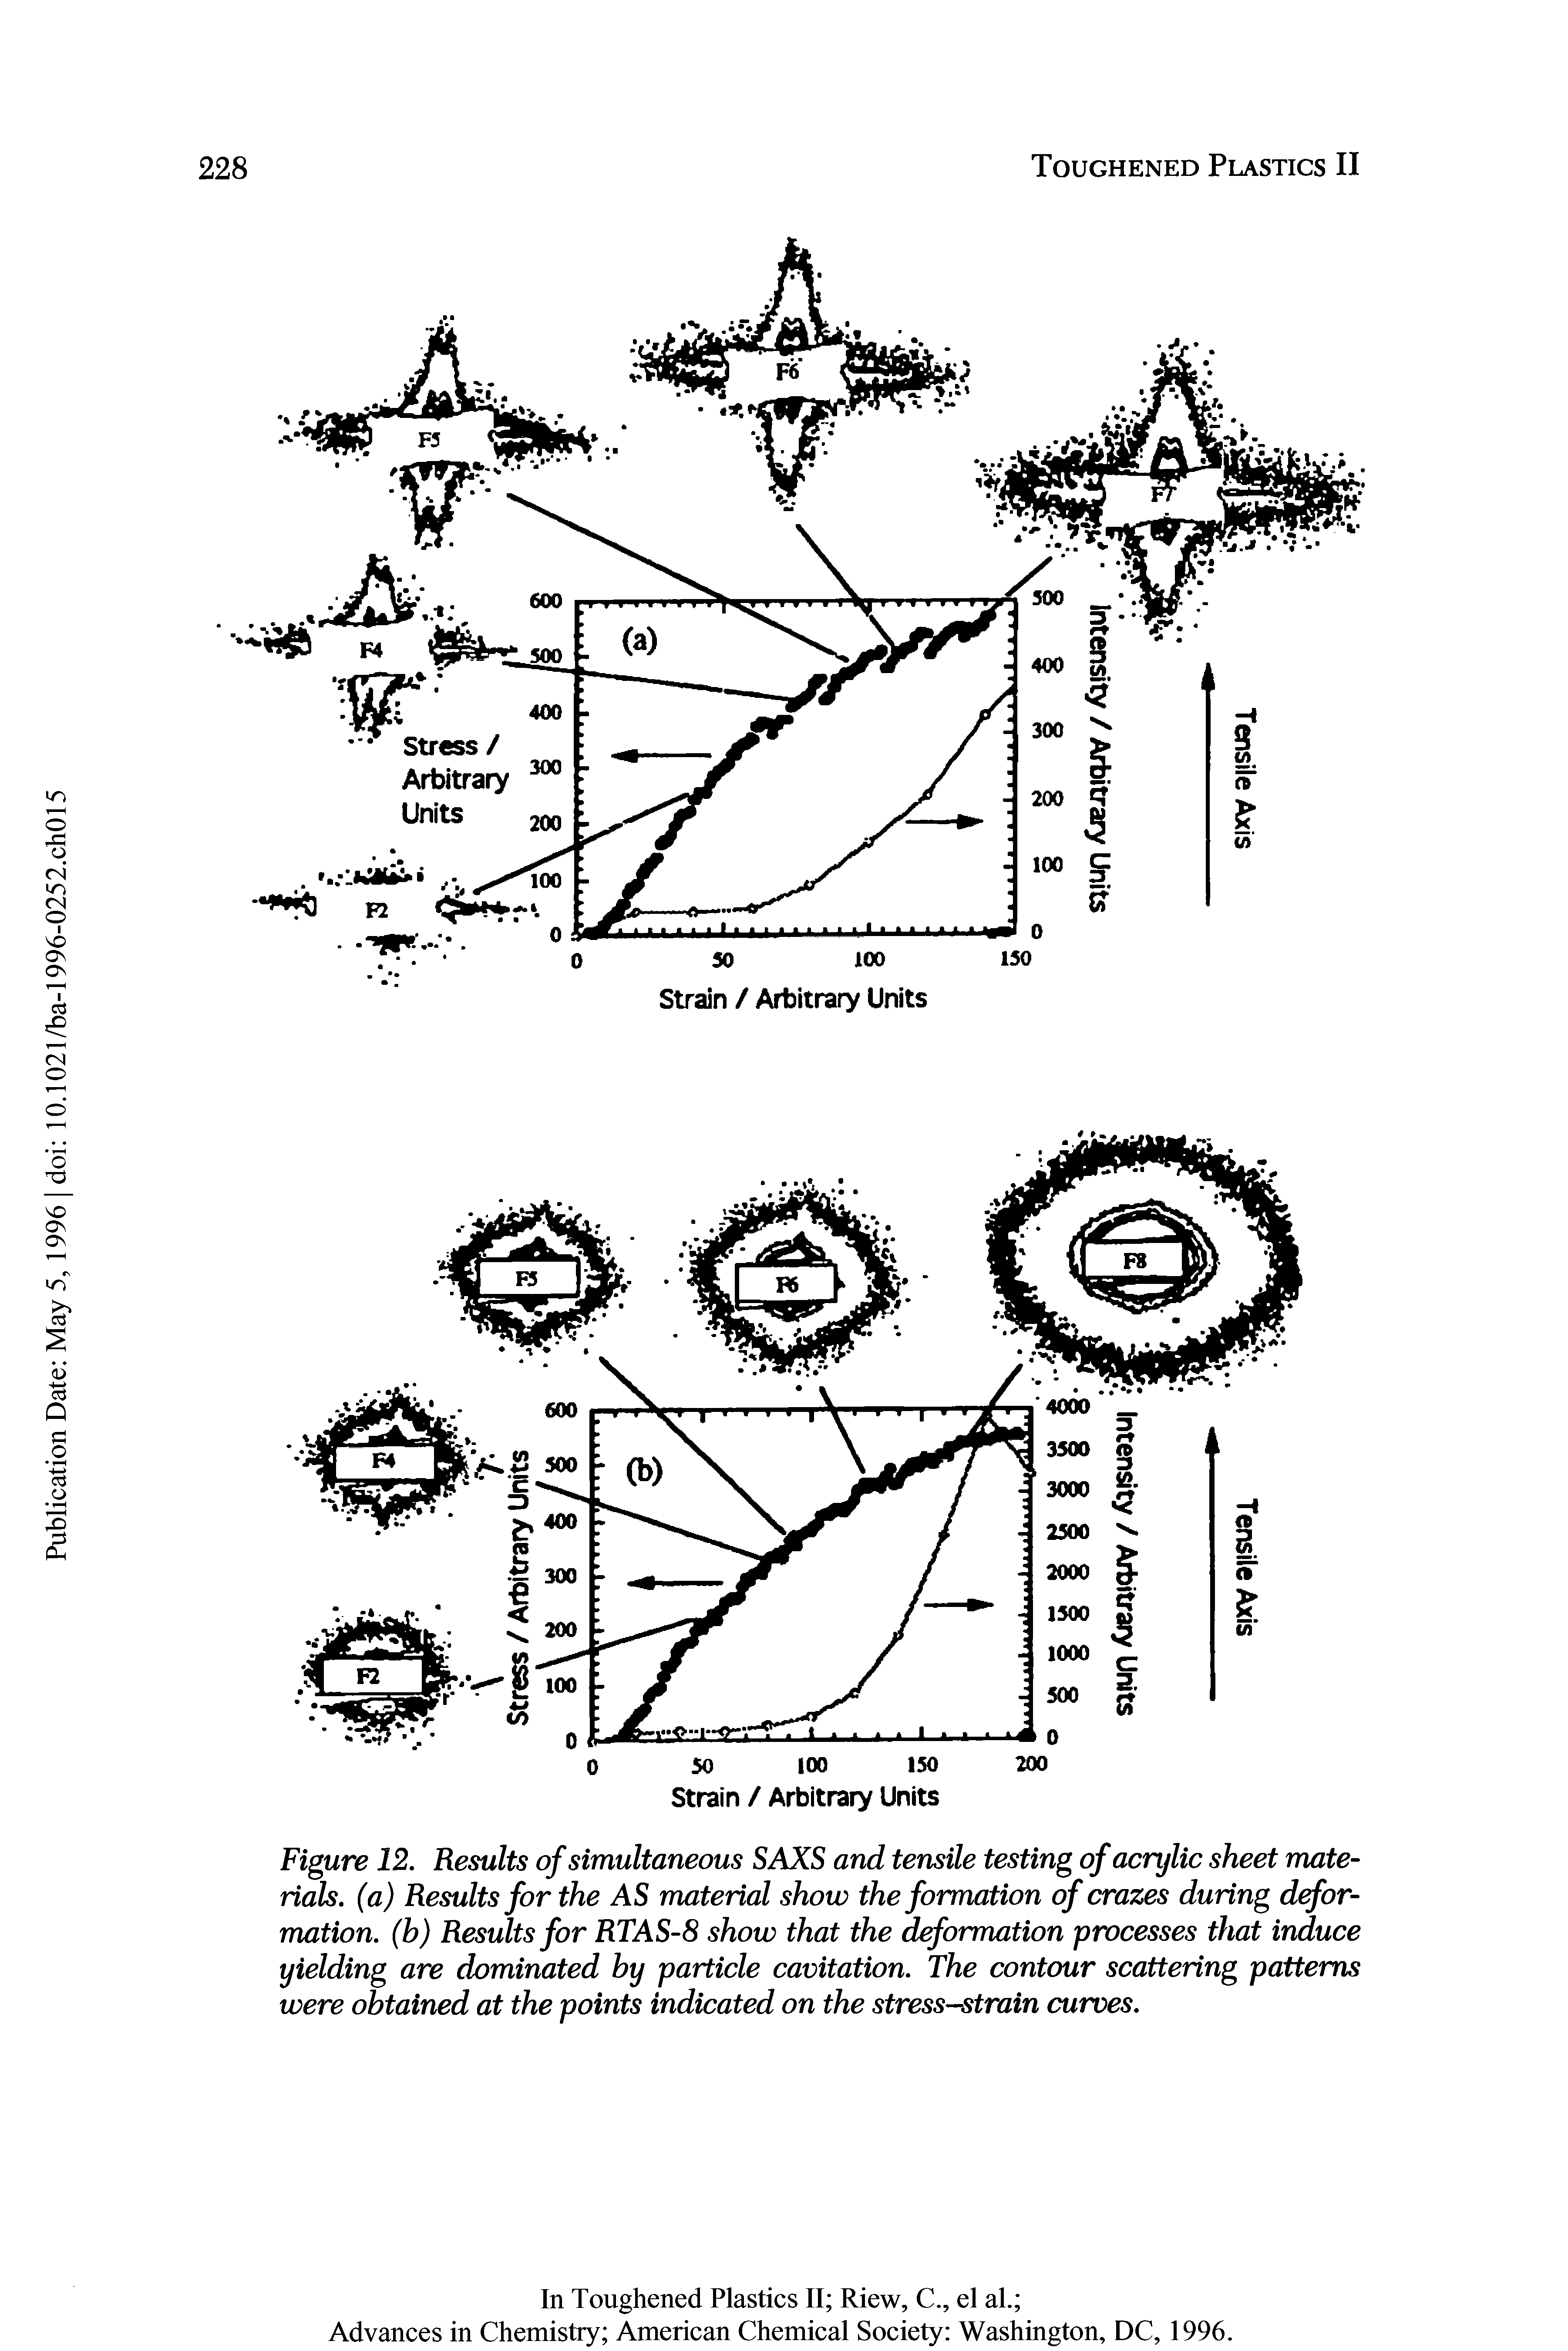 Figure 12. Results of simultaneous SAXS and tensile testing of acrylic sheet materials. (a) Results for the AS material show the formation of crazes during deformation. (b) Results for RTAS-8 show that the deformation processes that induce yielding are dominated by particle cavitation. The contour scattering patterns were obtained at the points indicated on the stress-strain curves.